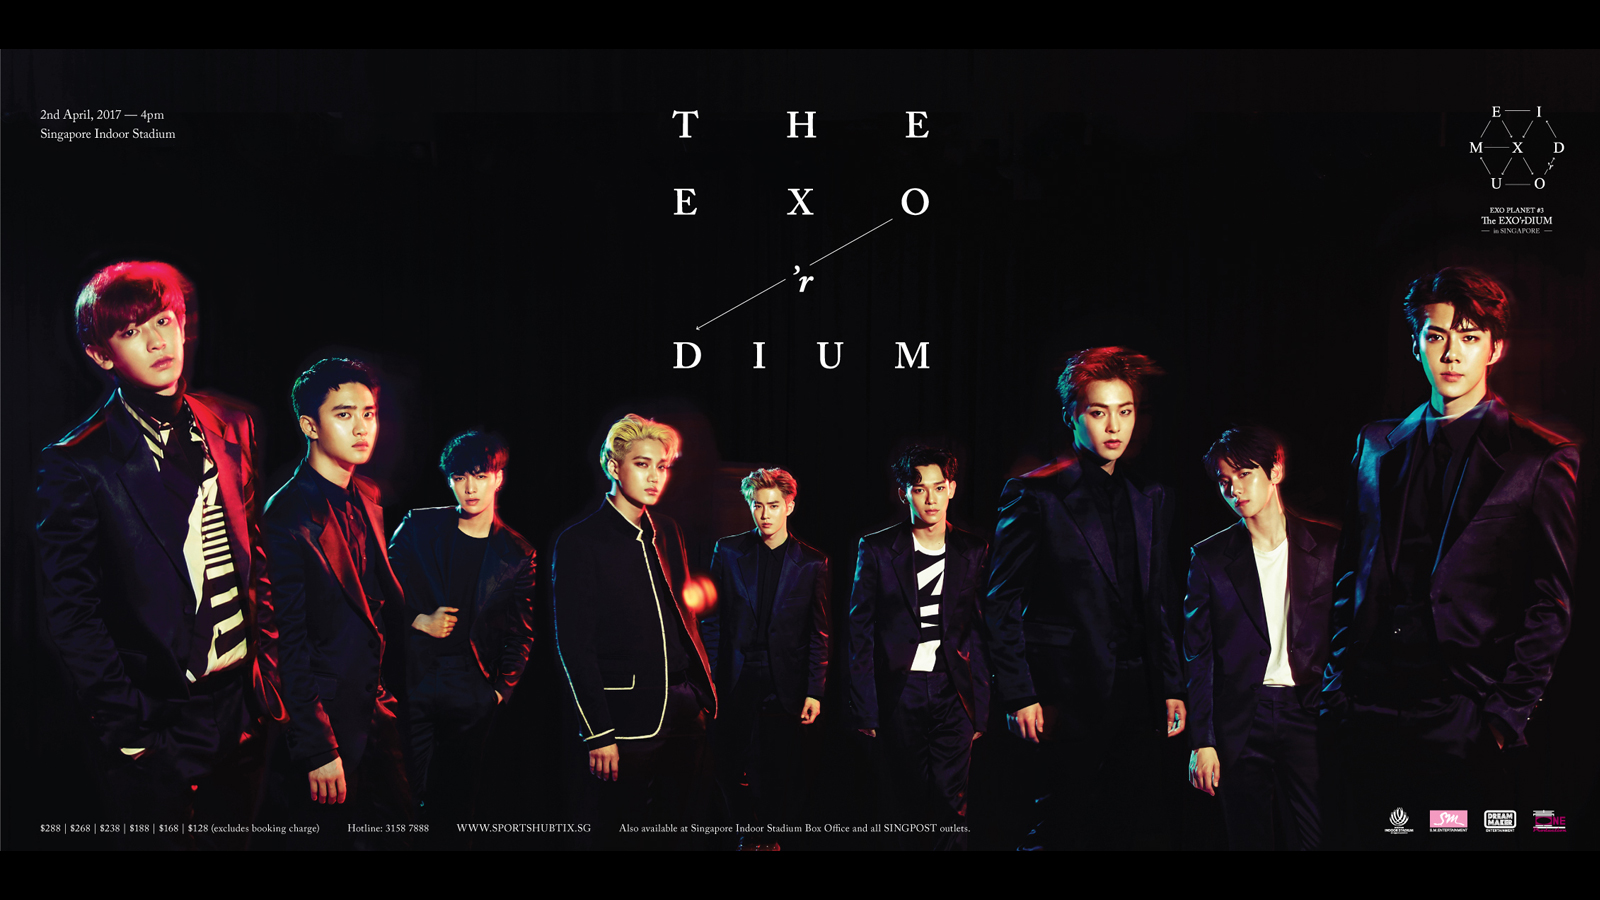 WIN tickets to EXO PLANET #3 - The EXO'rDIUM in Singapore - 8days